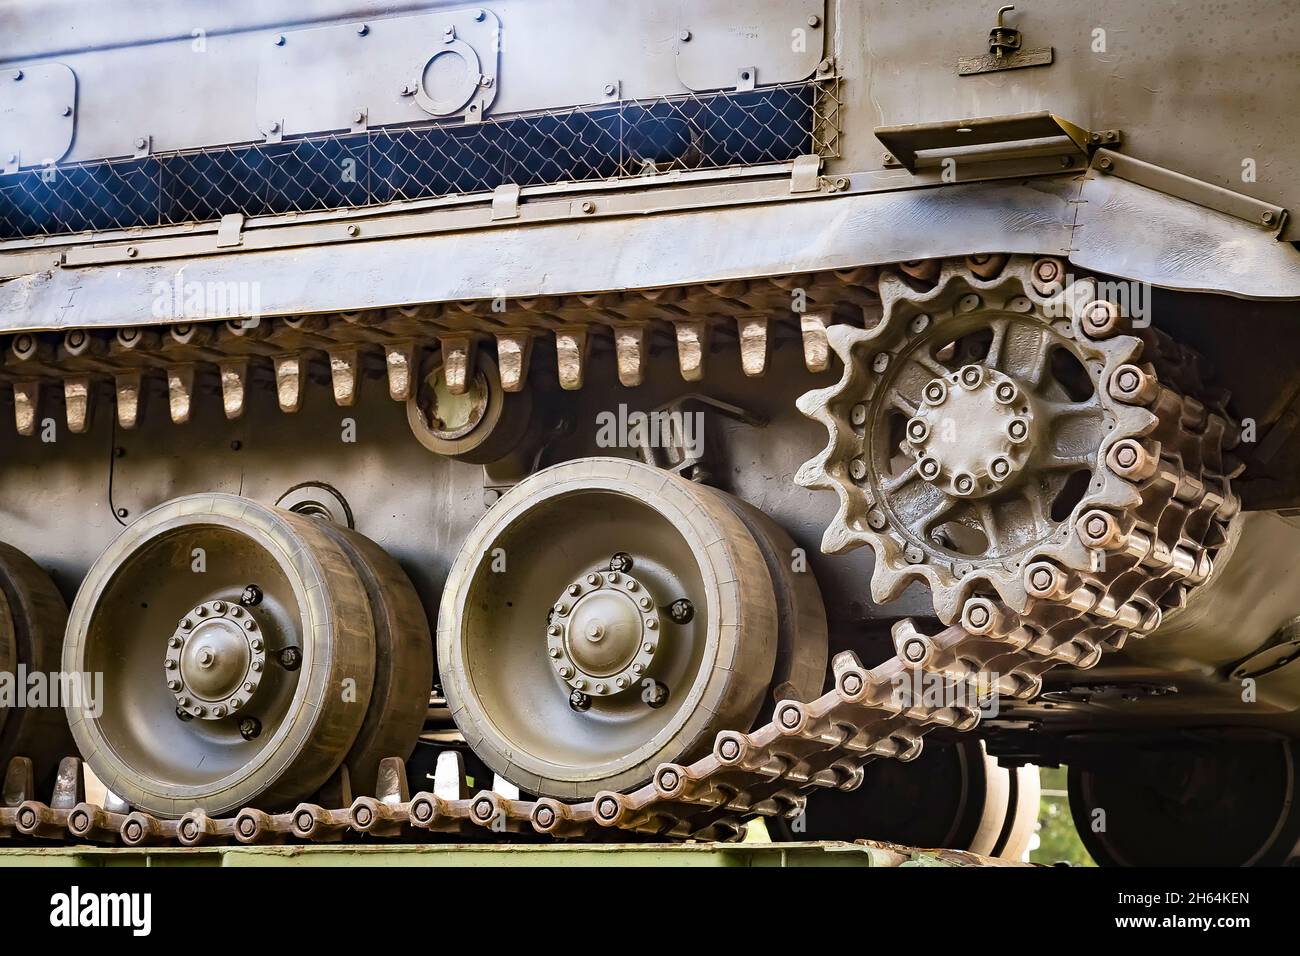 Closeup of green caterpillar track of the tank or Buk missile system standing. Stock Photo